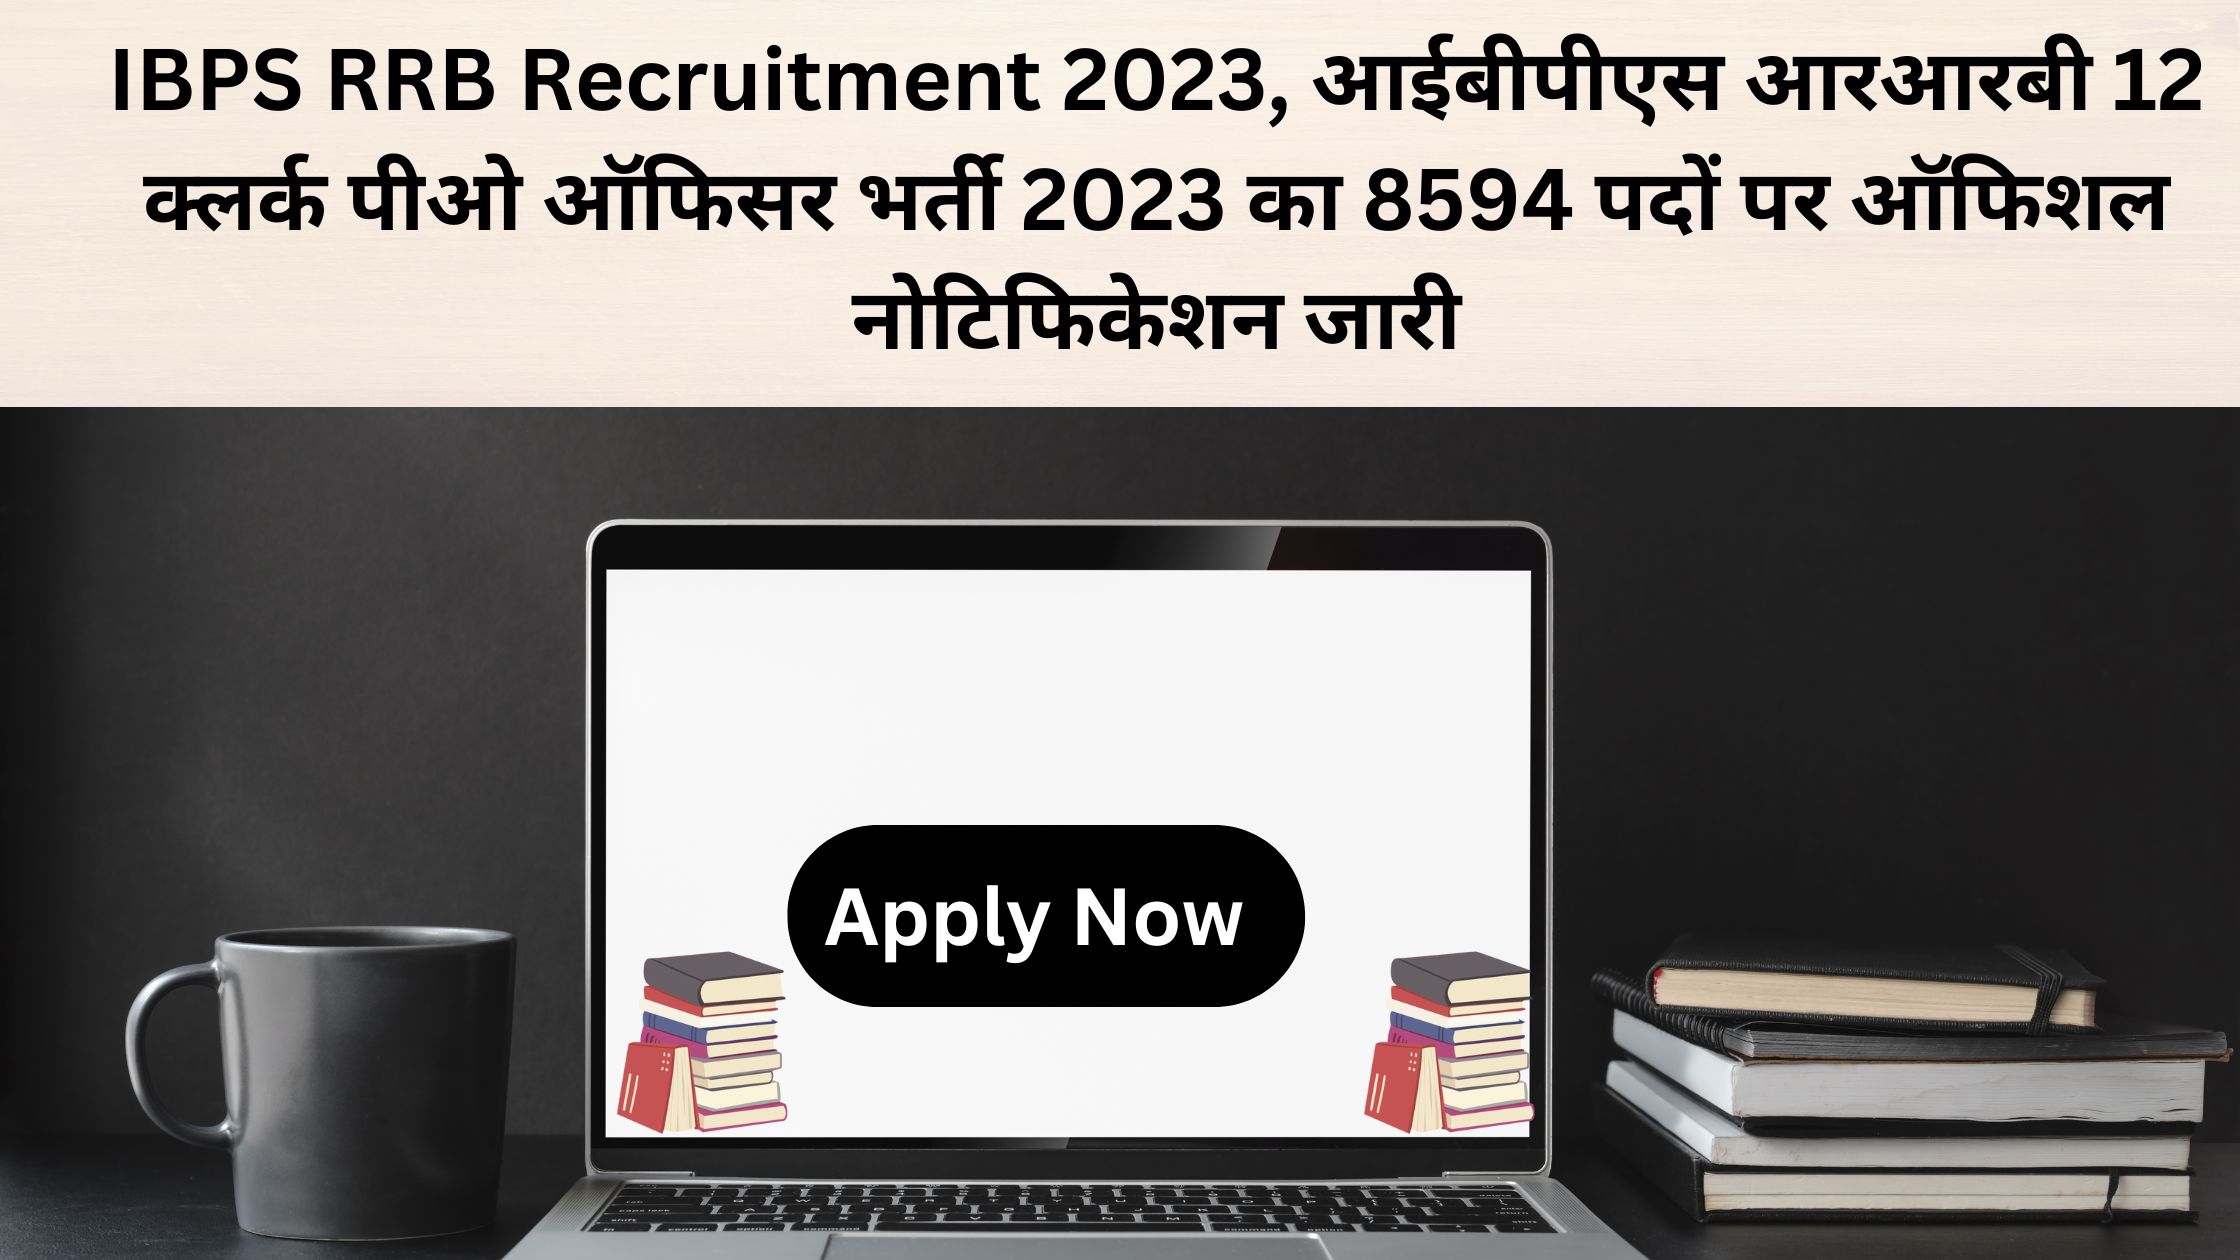 IBPS RRB Recruitment 2023 Apply Now